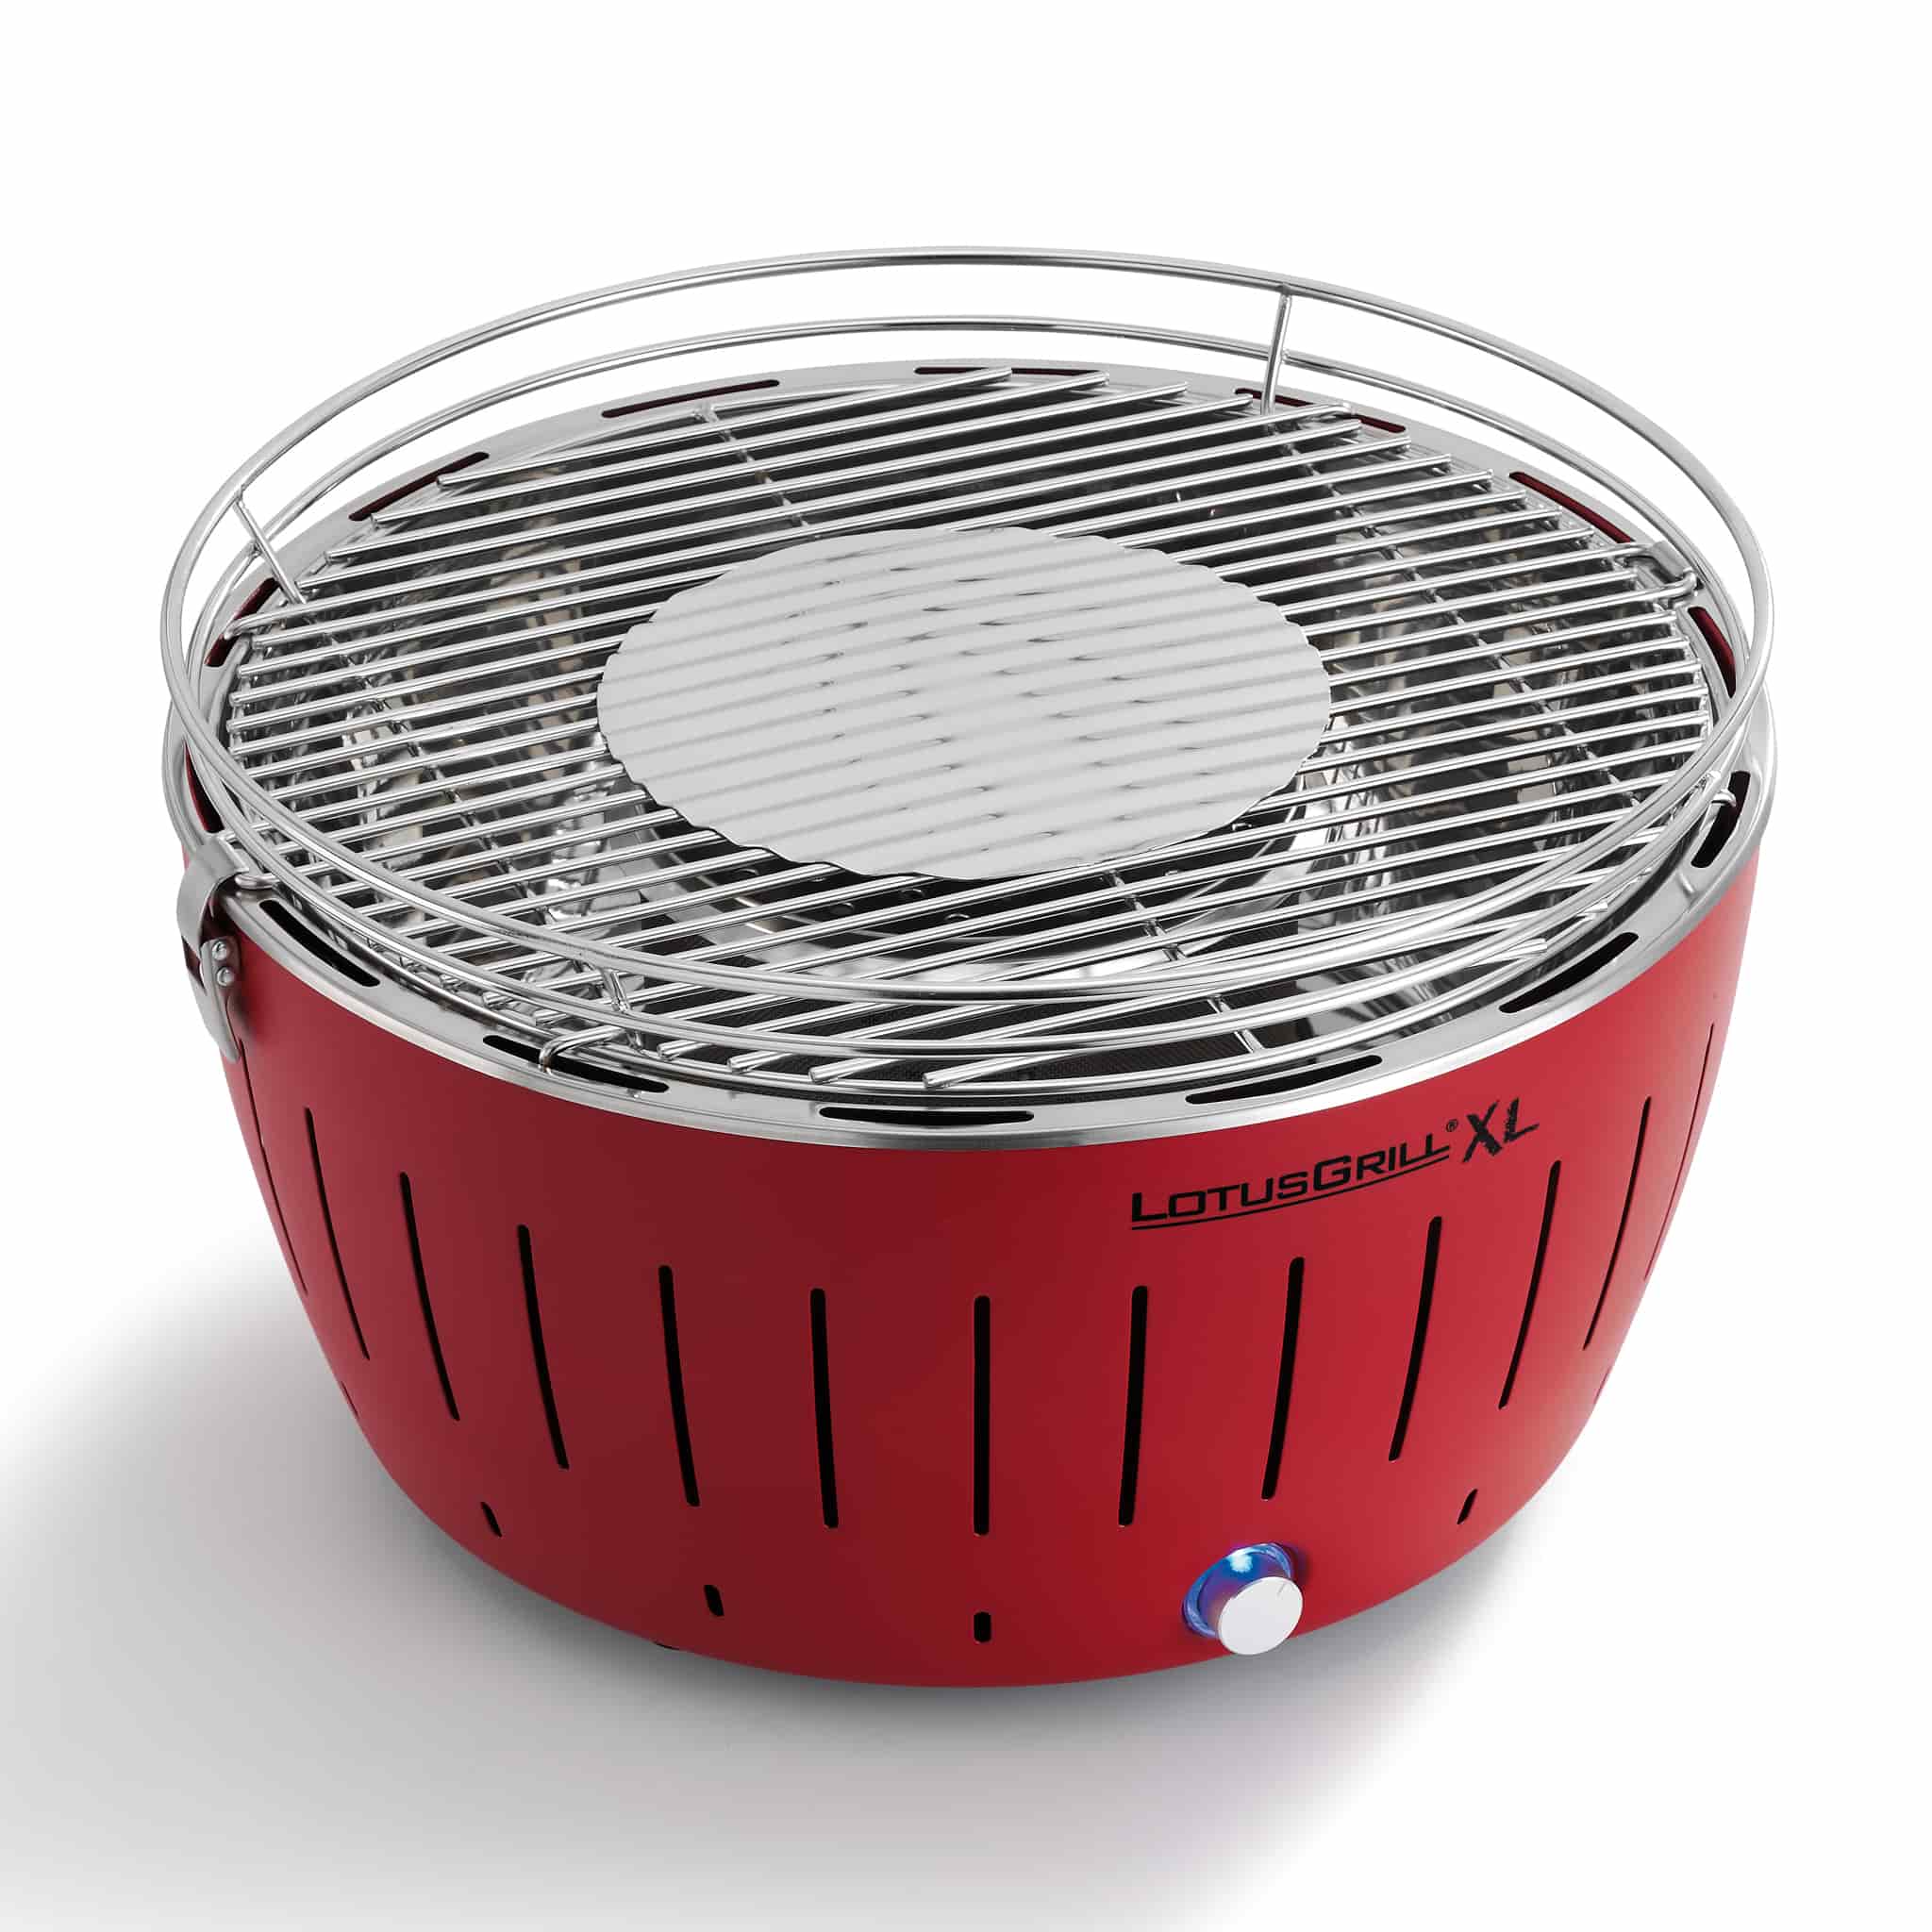 Lotus Grill XL Red top